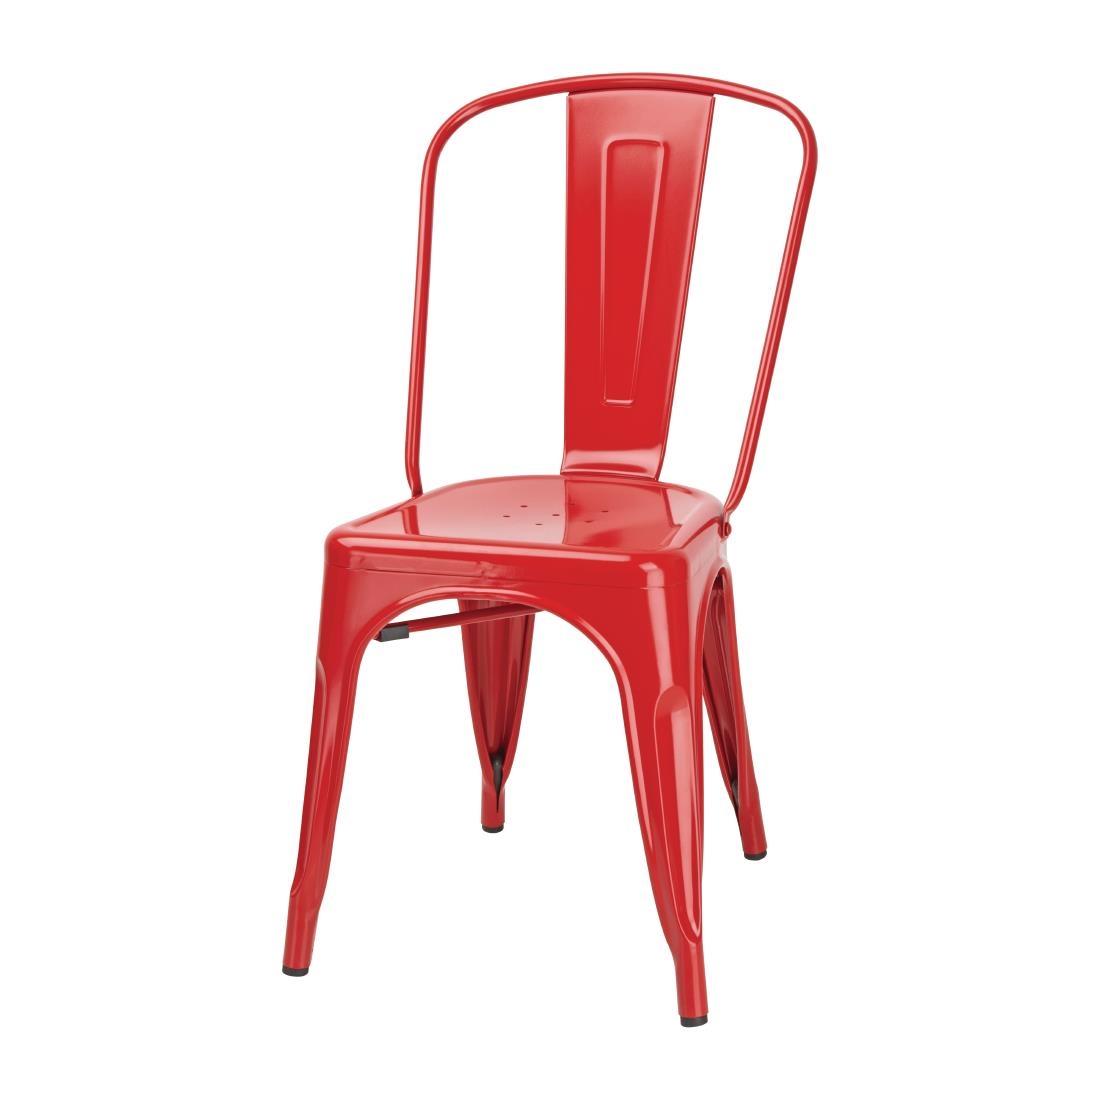 Bolero Bistro Steel Side Chair Red (Pack of 4) - GL330  - 2